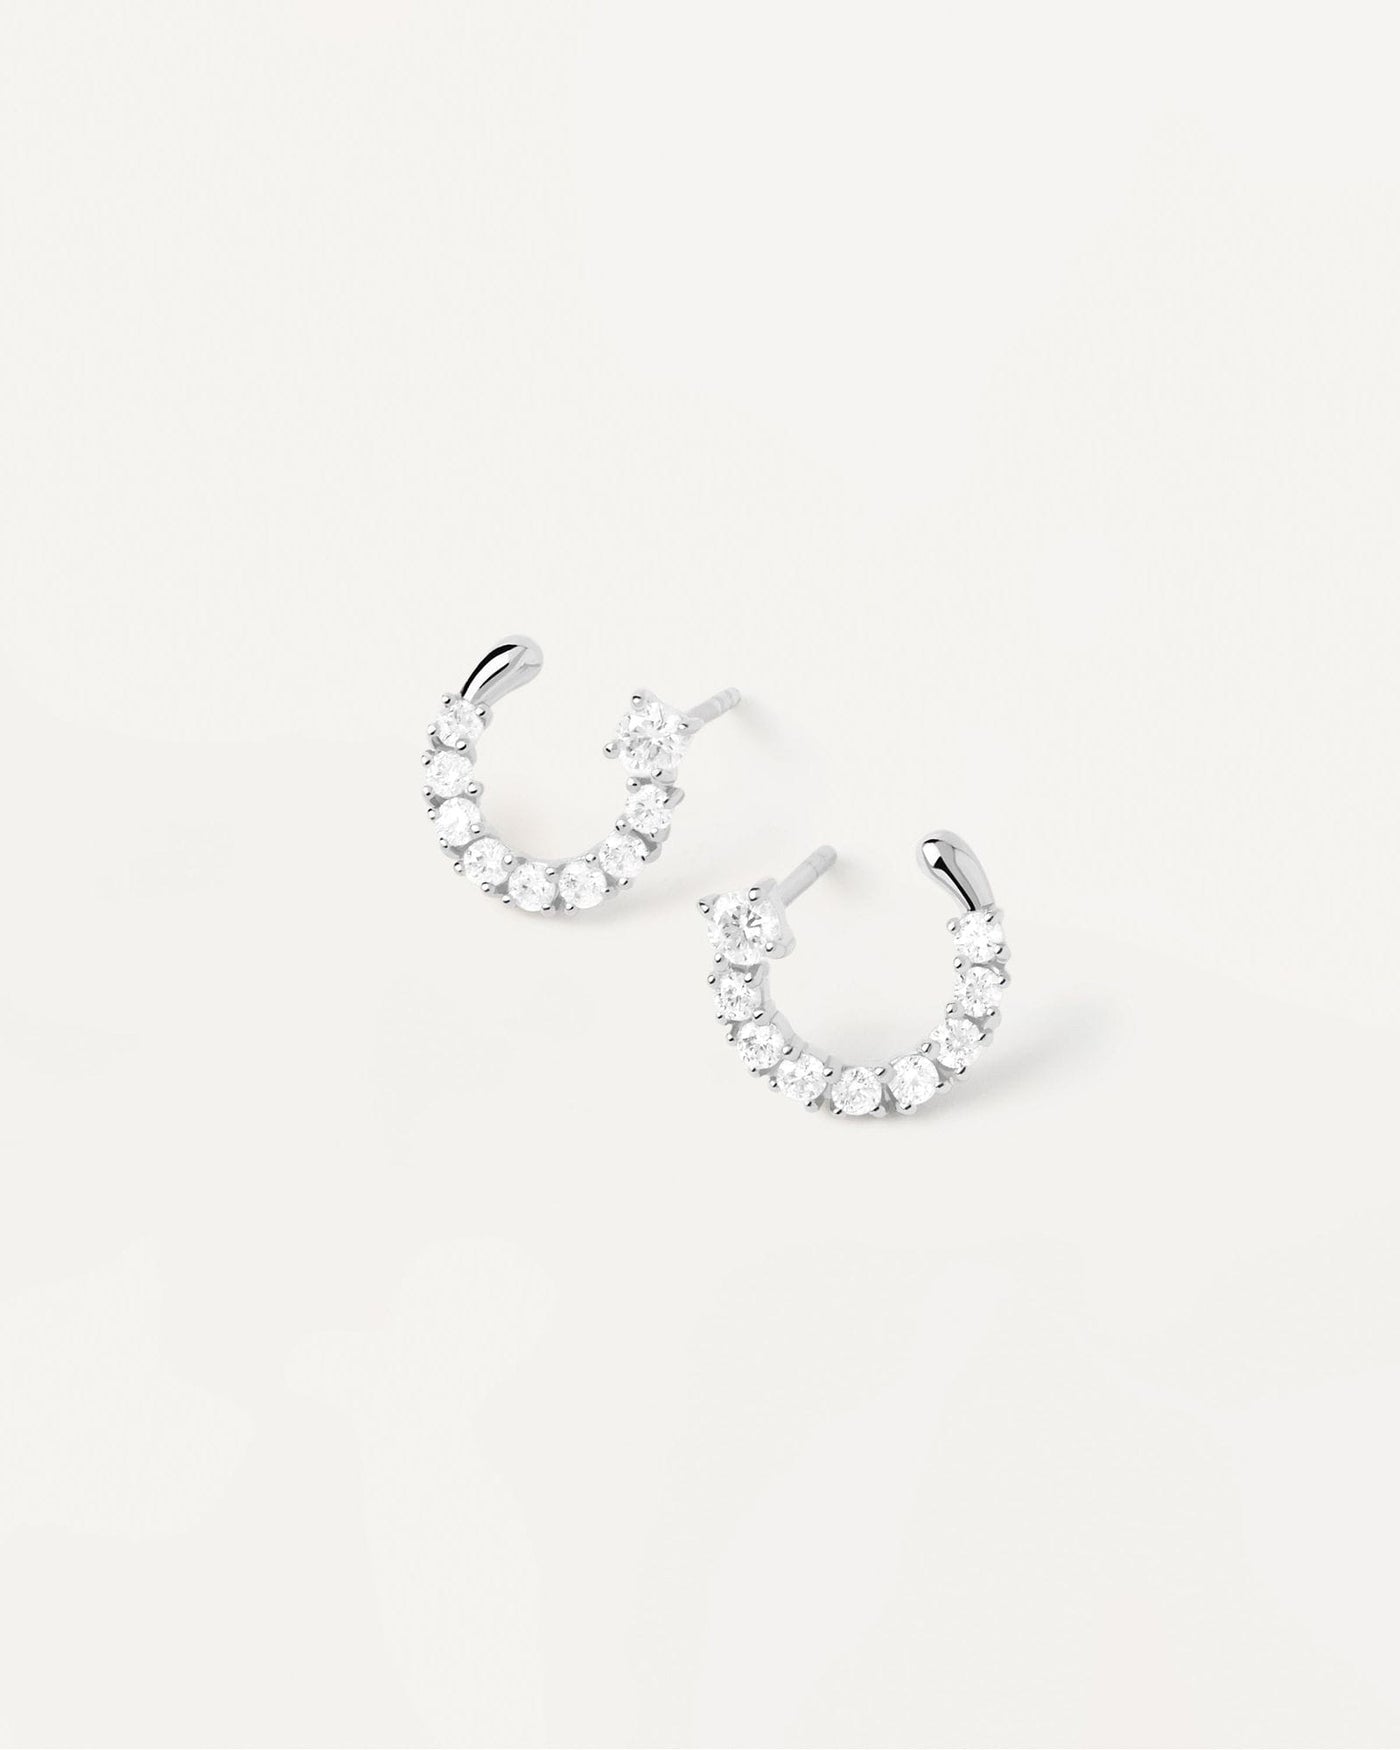 2024 Selection | Leona Silver Earrings. Semi-circle small earrings in sterling silver with white crystals. Get the latest arrival from PDPAOLA. Place your order safely and get this Best Seller. Free Shipping.